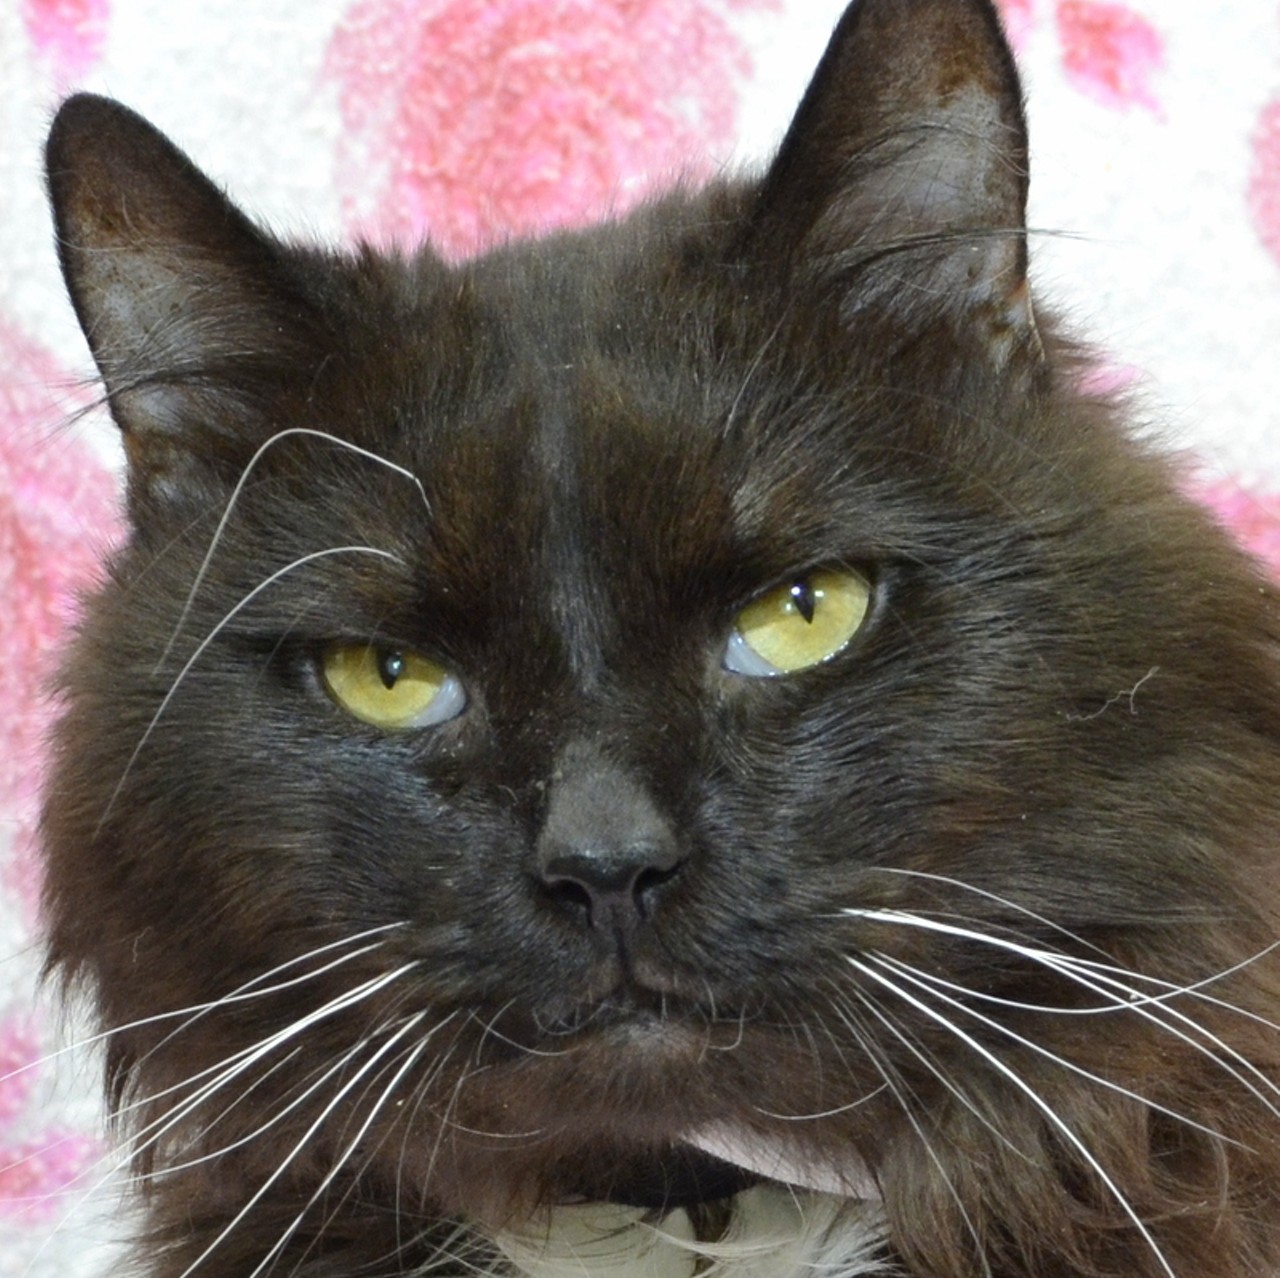 NAME:  Tux 
GENDER: Male
BREED: Domestic Longhair
AGE: 10 years, 1 month
WEIGHT: 9 pounds
SPECIAL CONSIDERATIONS: None. Tux&#146;s body was shaved only because he arrived with matted fur.
REASON I CAME TO MHS: Agency transfer
LOCATION: Berman Center for Animal Care in Westland
ID NUMBER: 869727